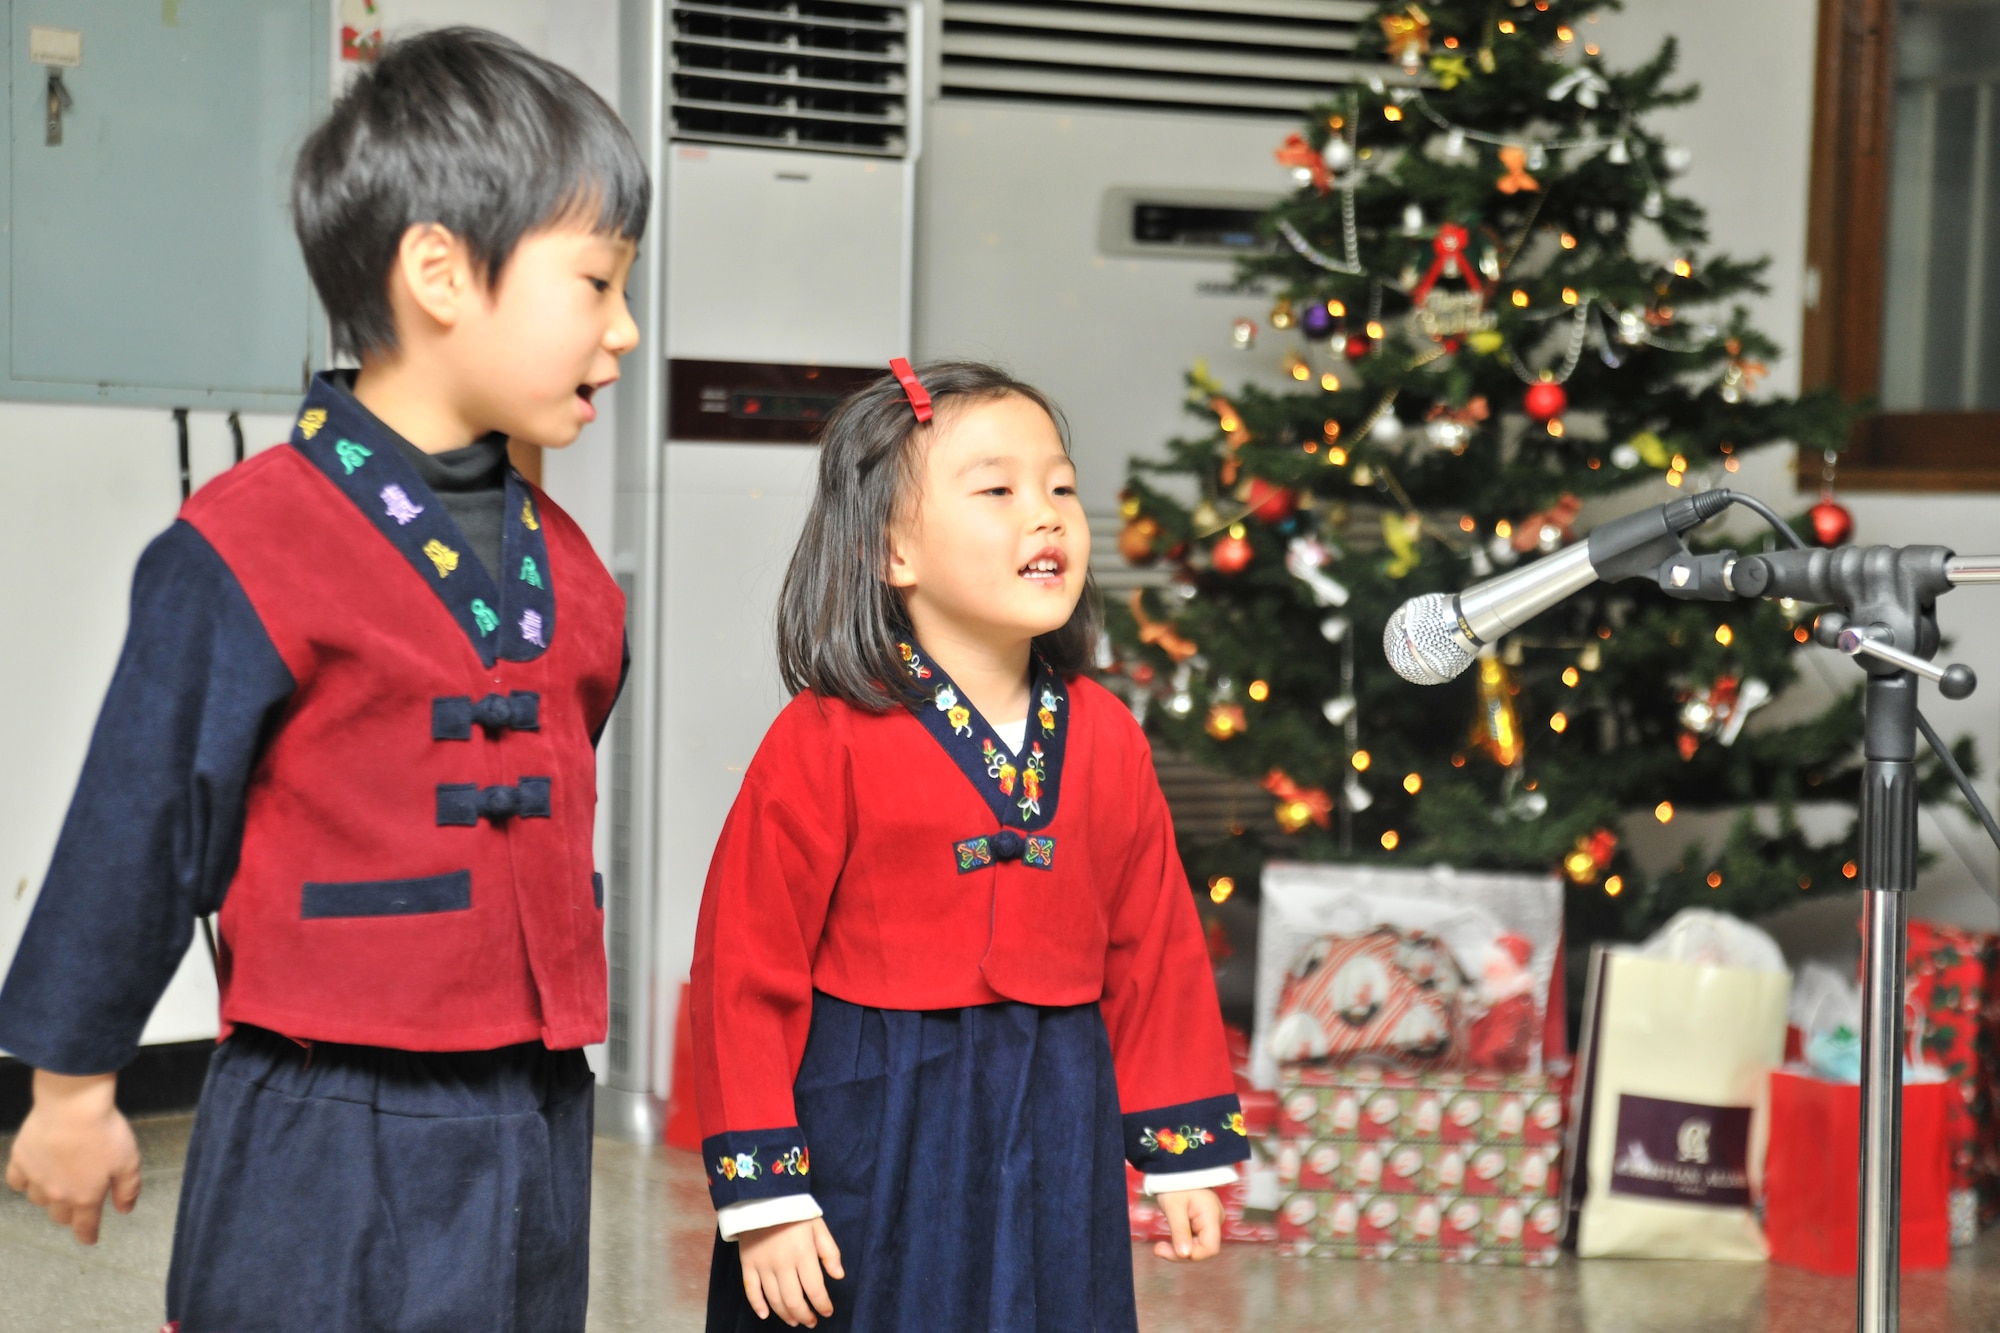 Children from the Samsung Orphanage in Gunsan City, Republic of Korea, perform for the Airmen of the 8th Security Forces Squadron Dec. 22, 2011. Airmen provided each child with three Christmas gifts. The defenders also served dinner and delivered a little Christmas cheer. (U.S. Air Force photo by Senior Airman Brittany Y. Auld/Released)